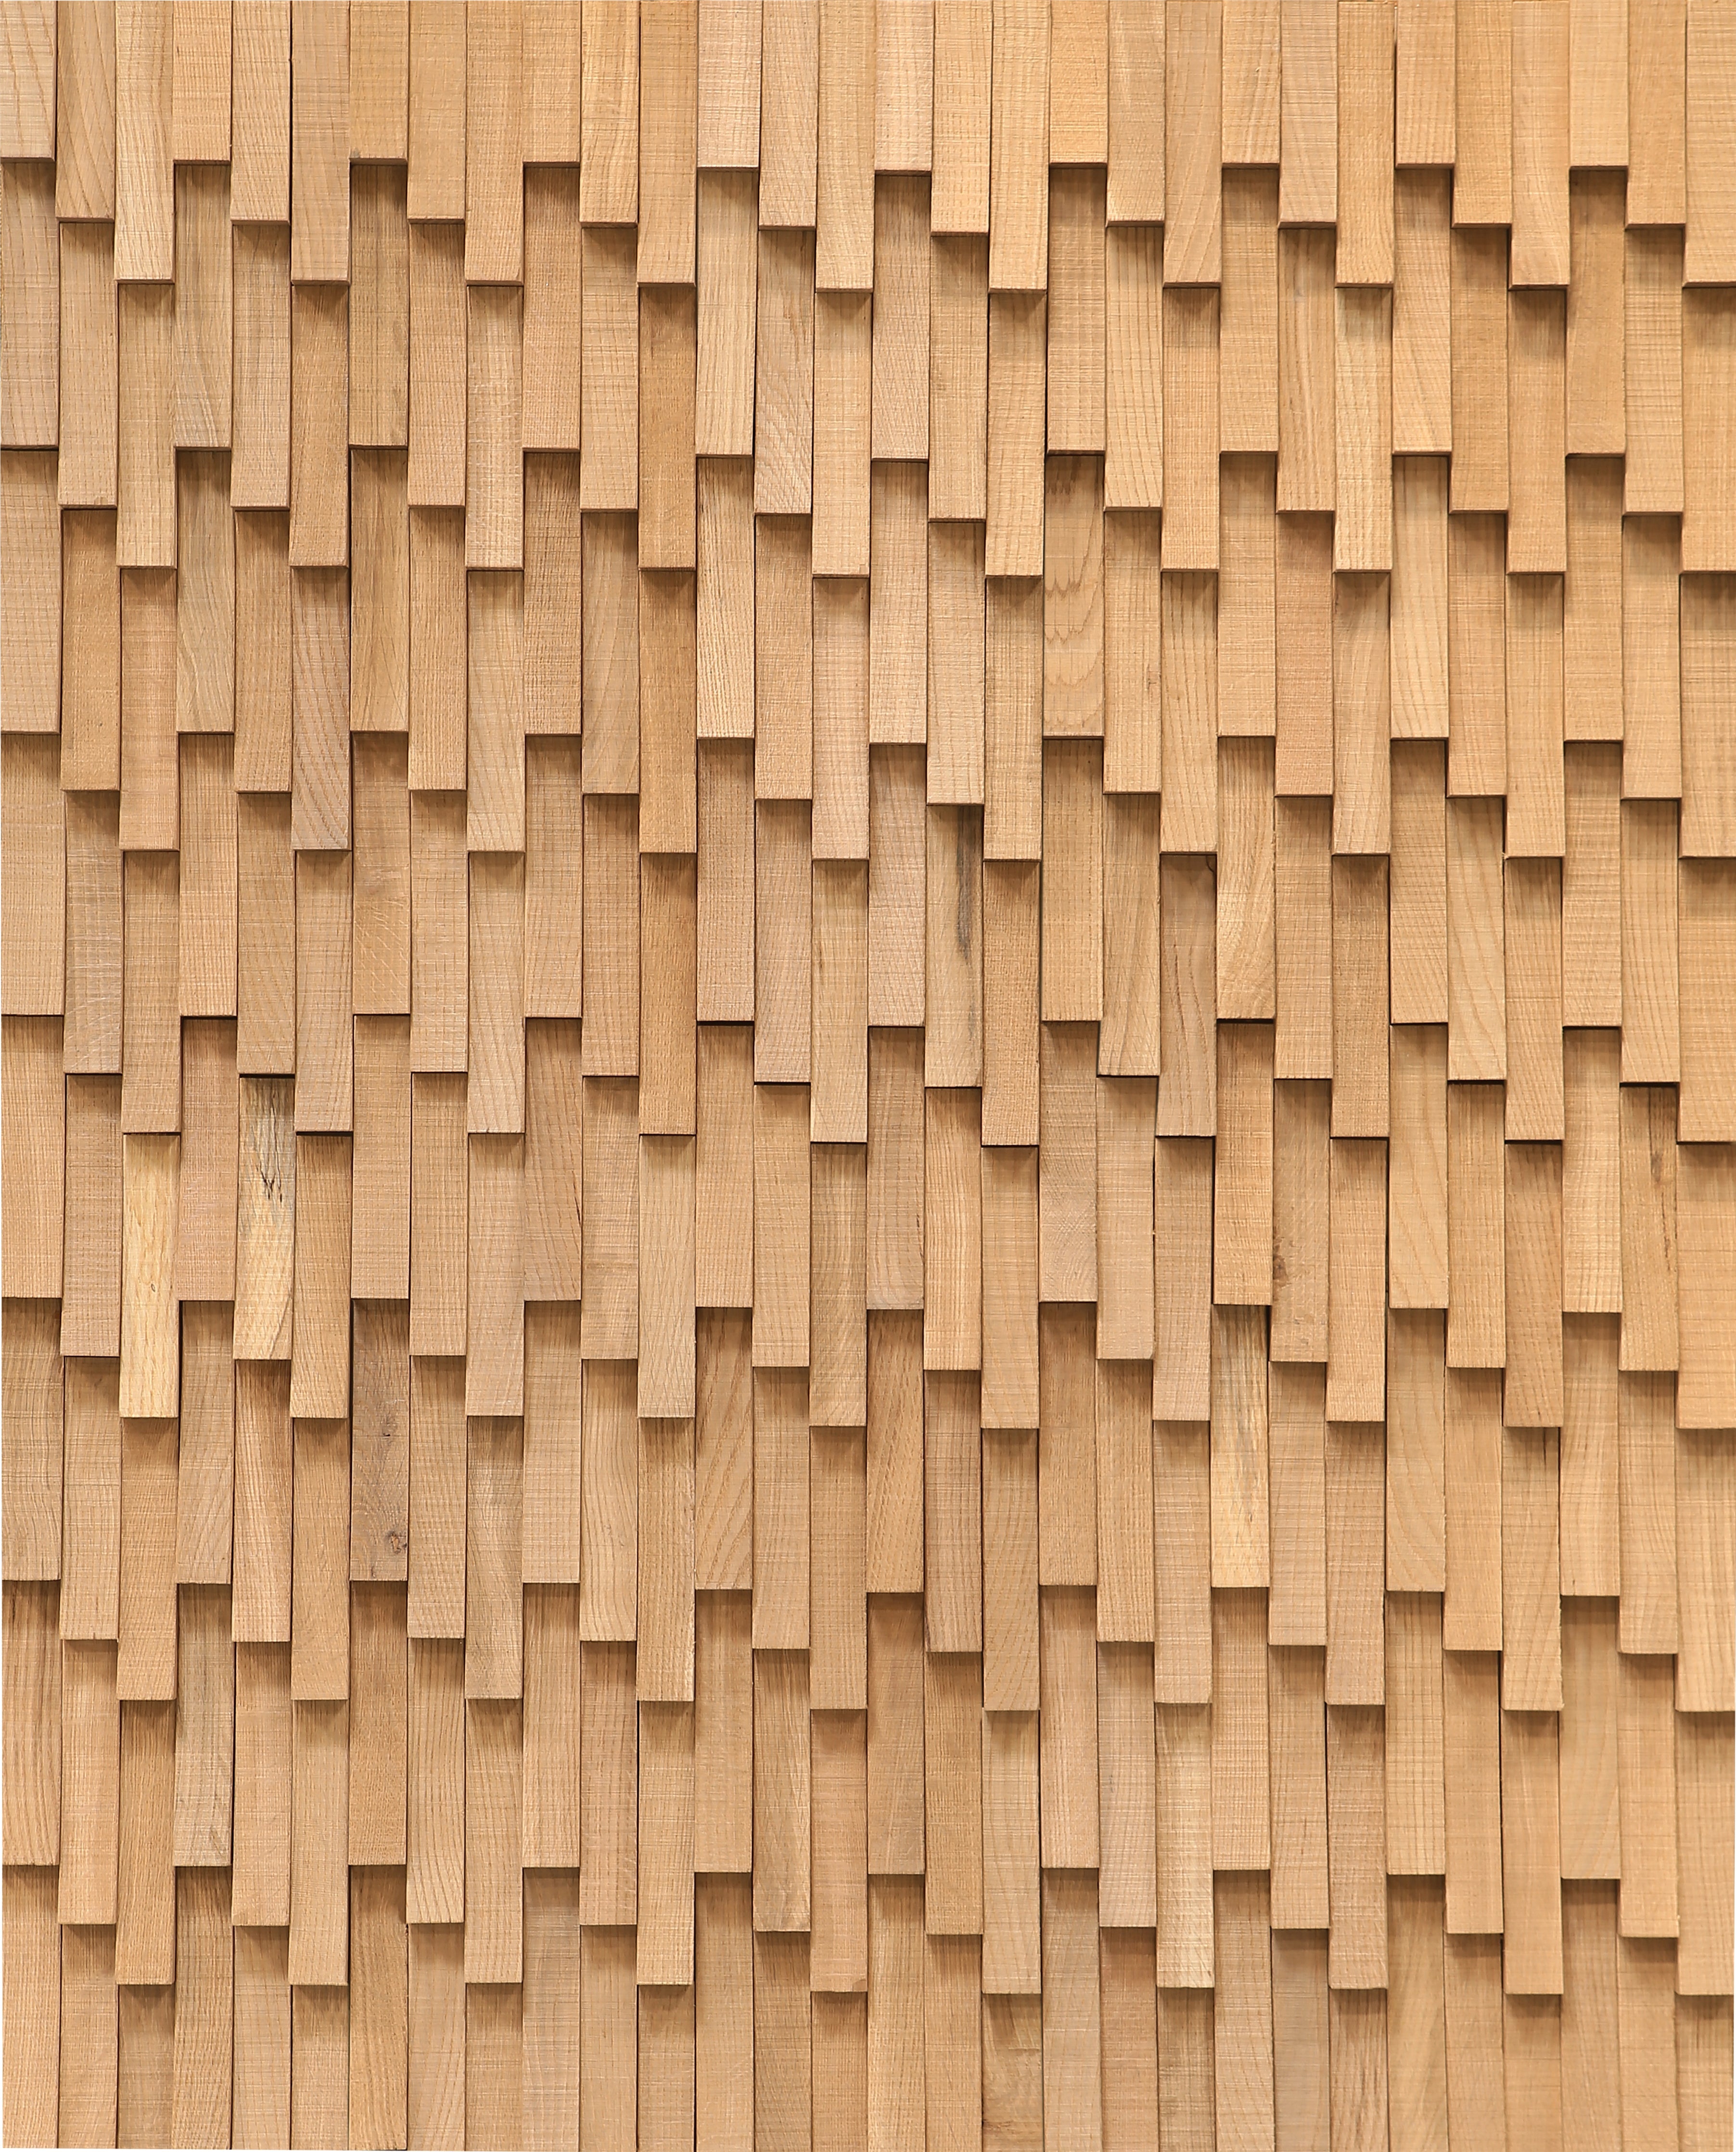 duchateau inceptiv wave sand oak three dimensional wall natural wood panel lacquer for interior use distributed by surface group international